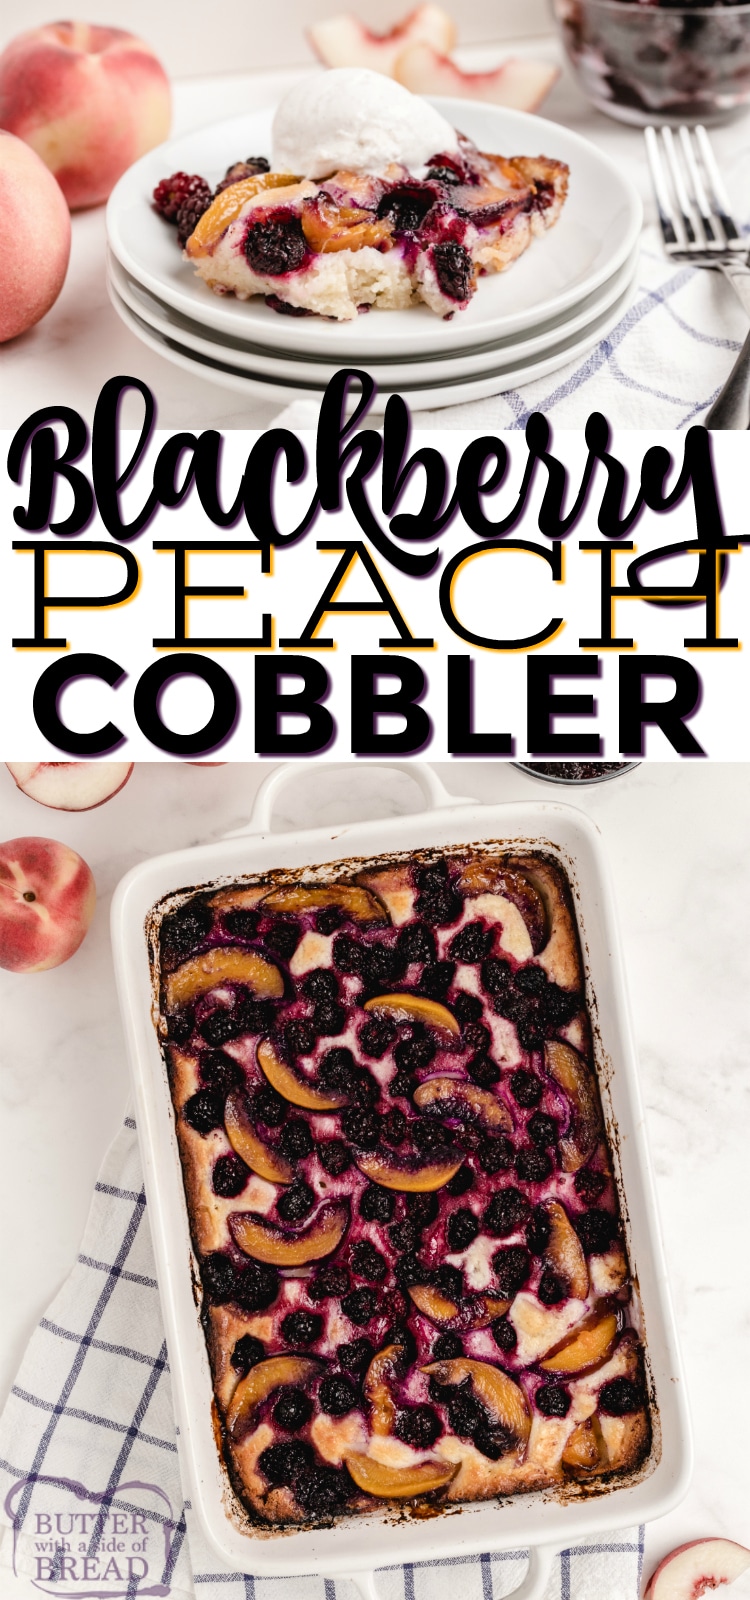 Blackberry Peach Cobbler is made with canned peaches, frozen blackberries and a few other simple ingredients. Delicious easy cobbler recipe! 